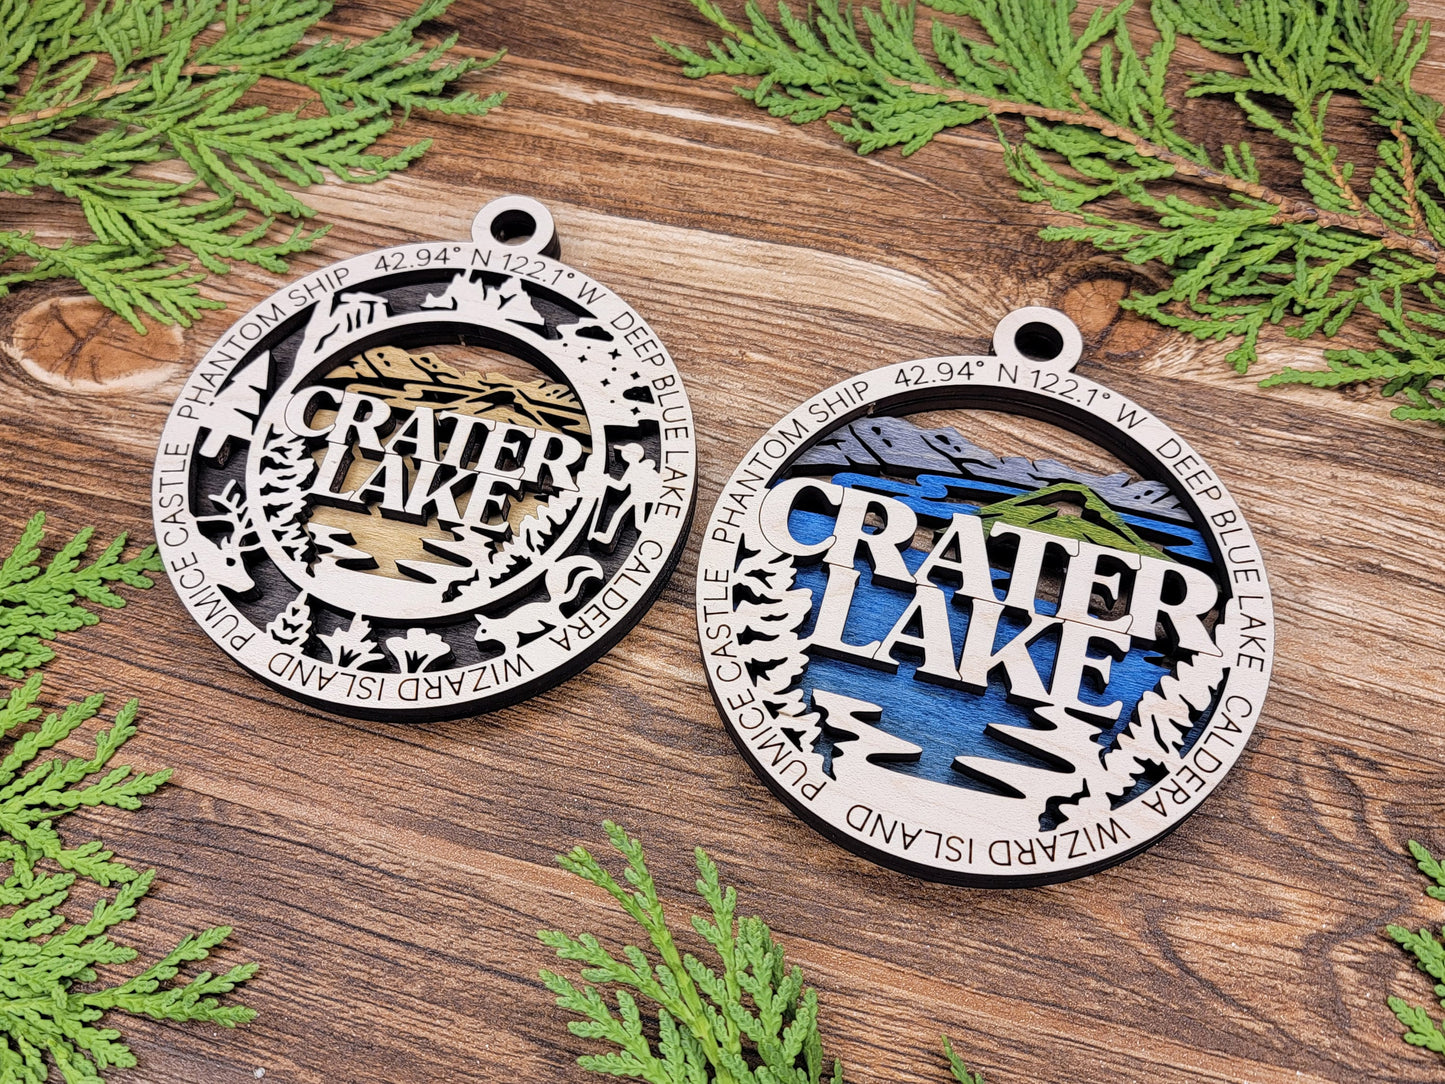 Crater Lake Park Ornament - Includes 2 Ornaments - Laser Design SVG, PDF, AI File Download - Tested On Glowforge and LightBurn